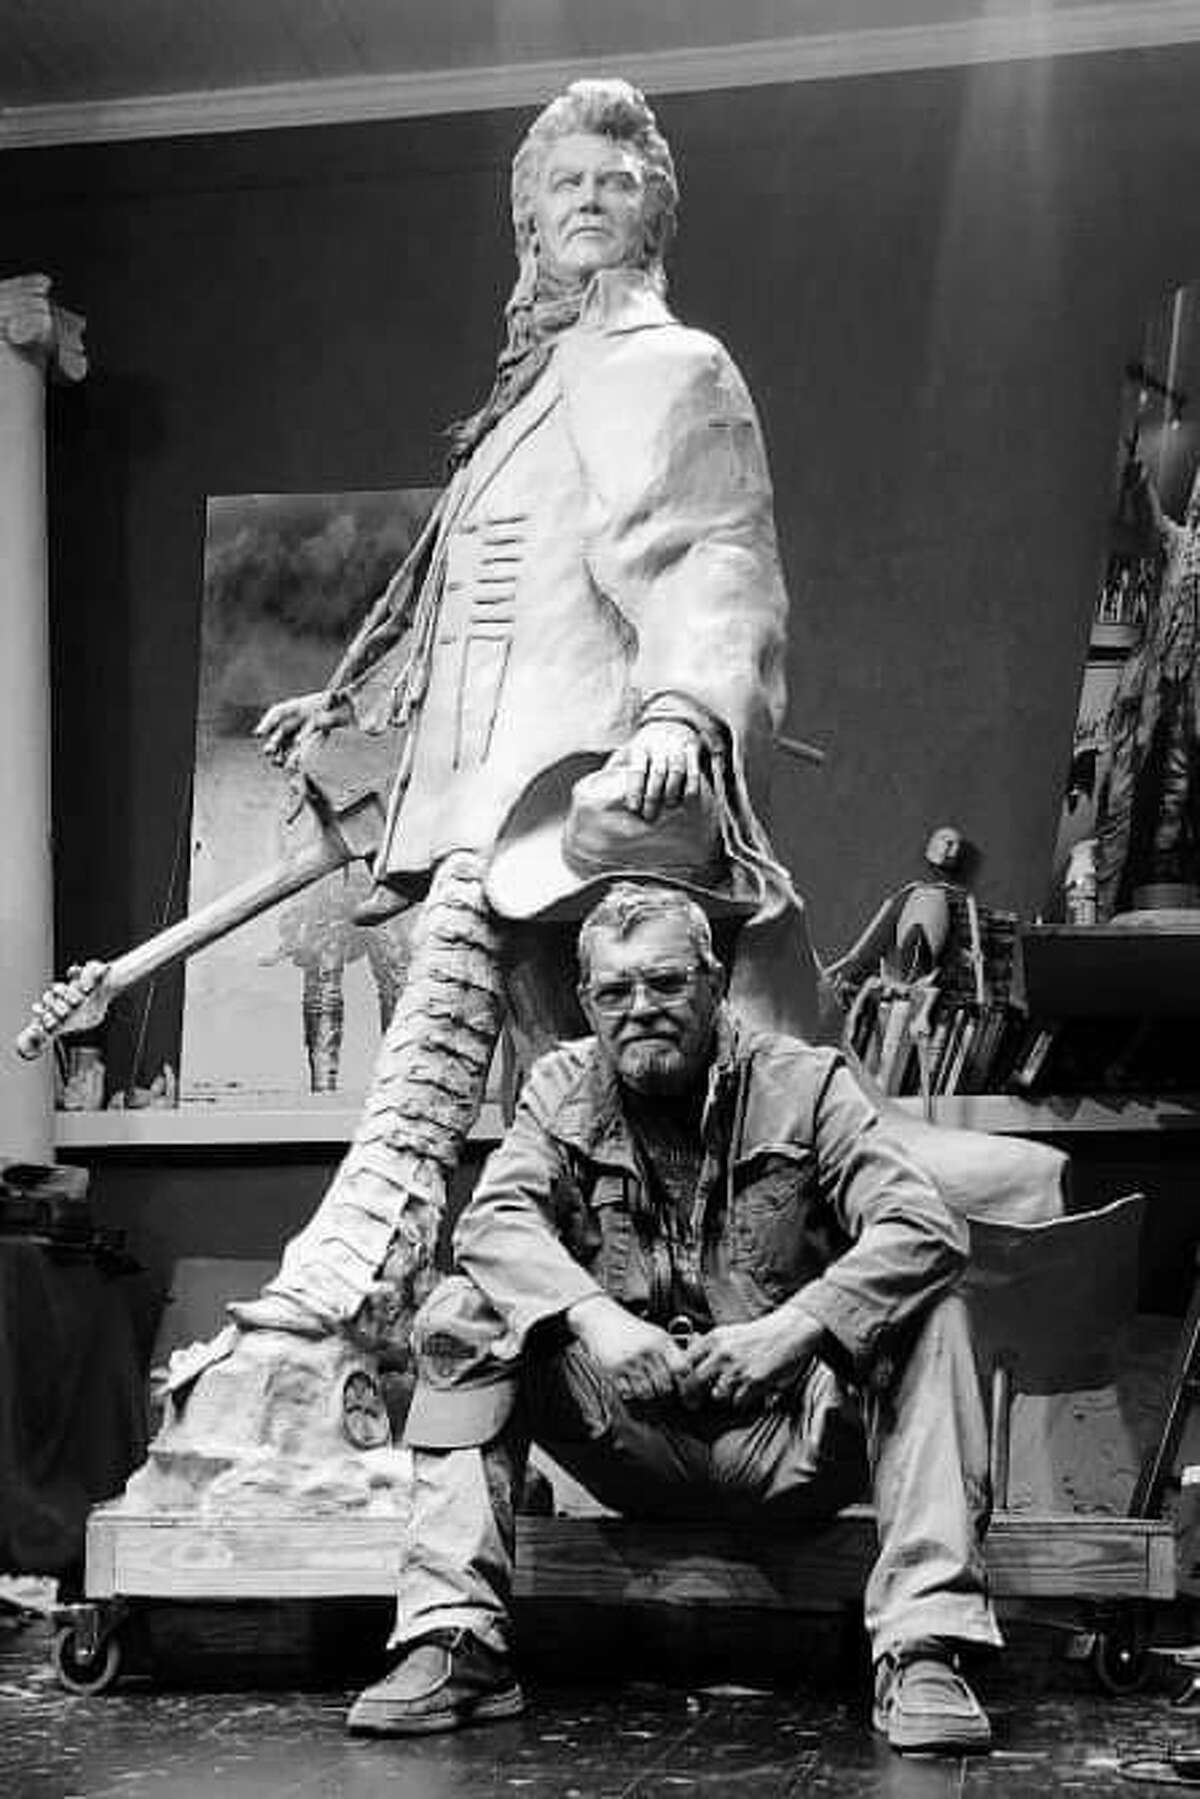 As Conroe sculptor Craig Campobella moves on from his downtown gallery, he is celebrating the unveiling of his Marty Stuart statue in Mississippi in May. He is pictured here with his Marty Stuart statue “The Pilgrim.” He worked on the statue in his downtown Conroe gallery.